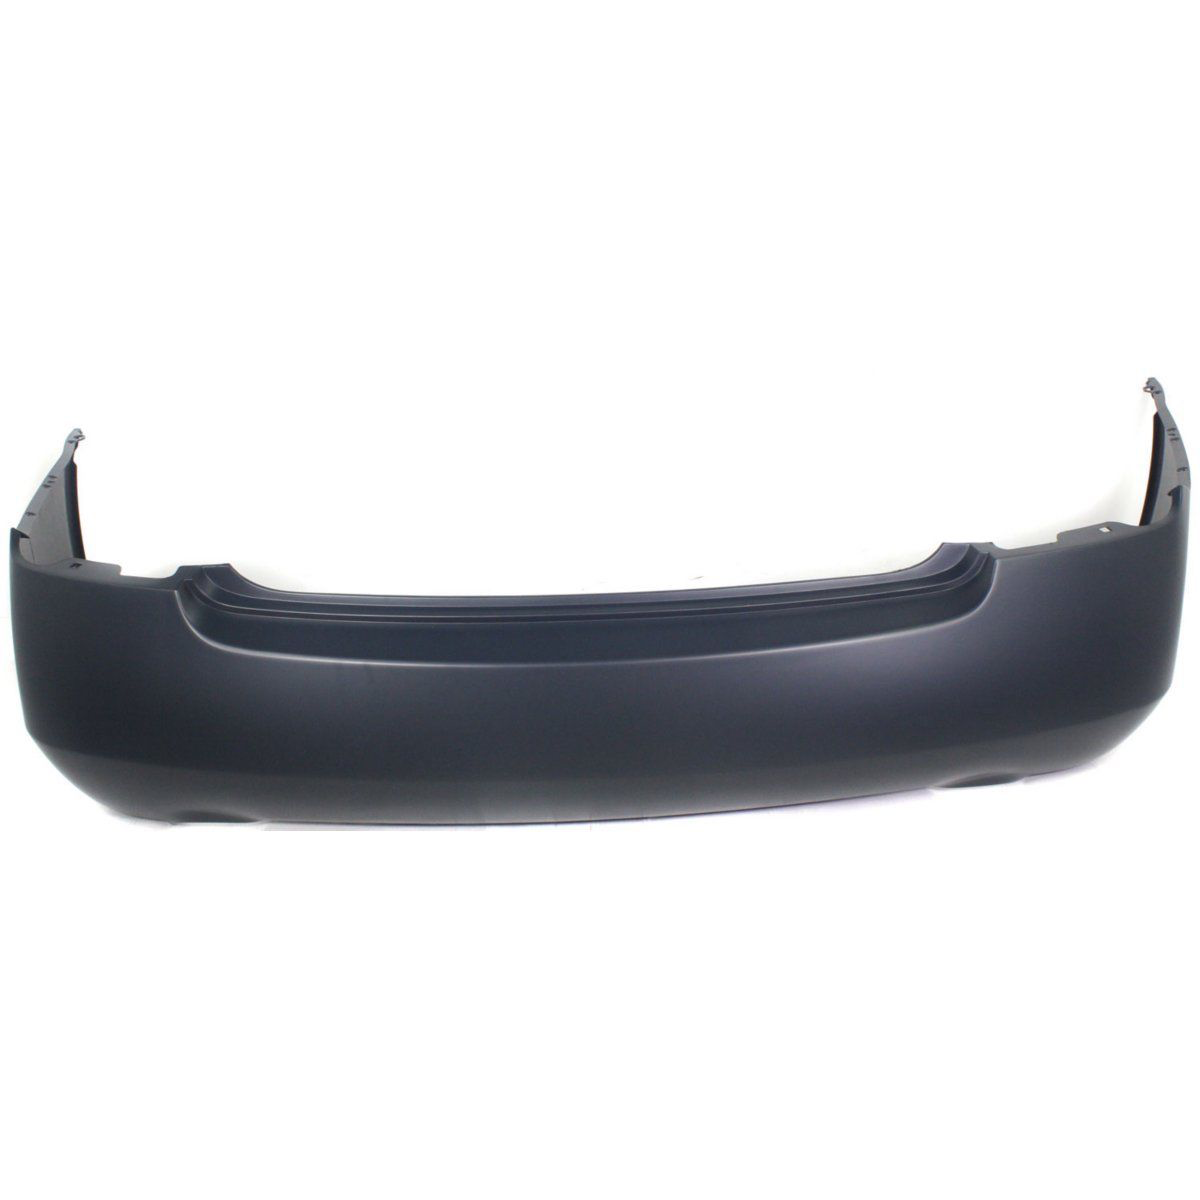 2002-2006 NISSAN ALTIMA Rear Bumper Cover w/3.5L V6 engine Painted to Match